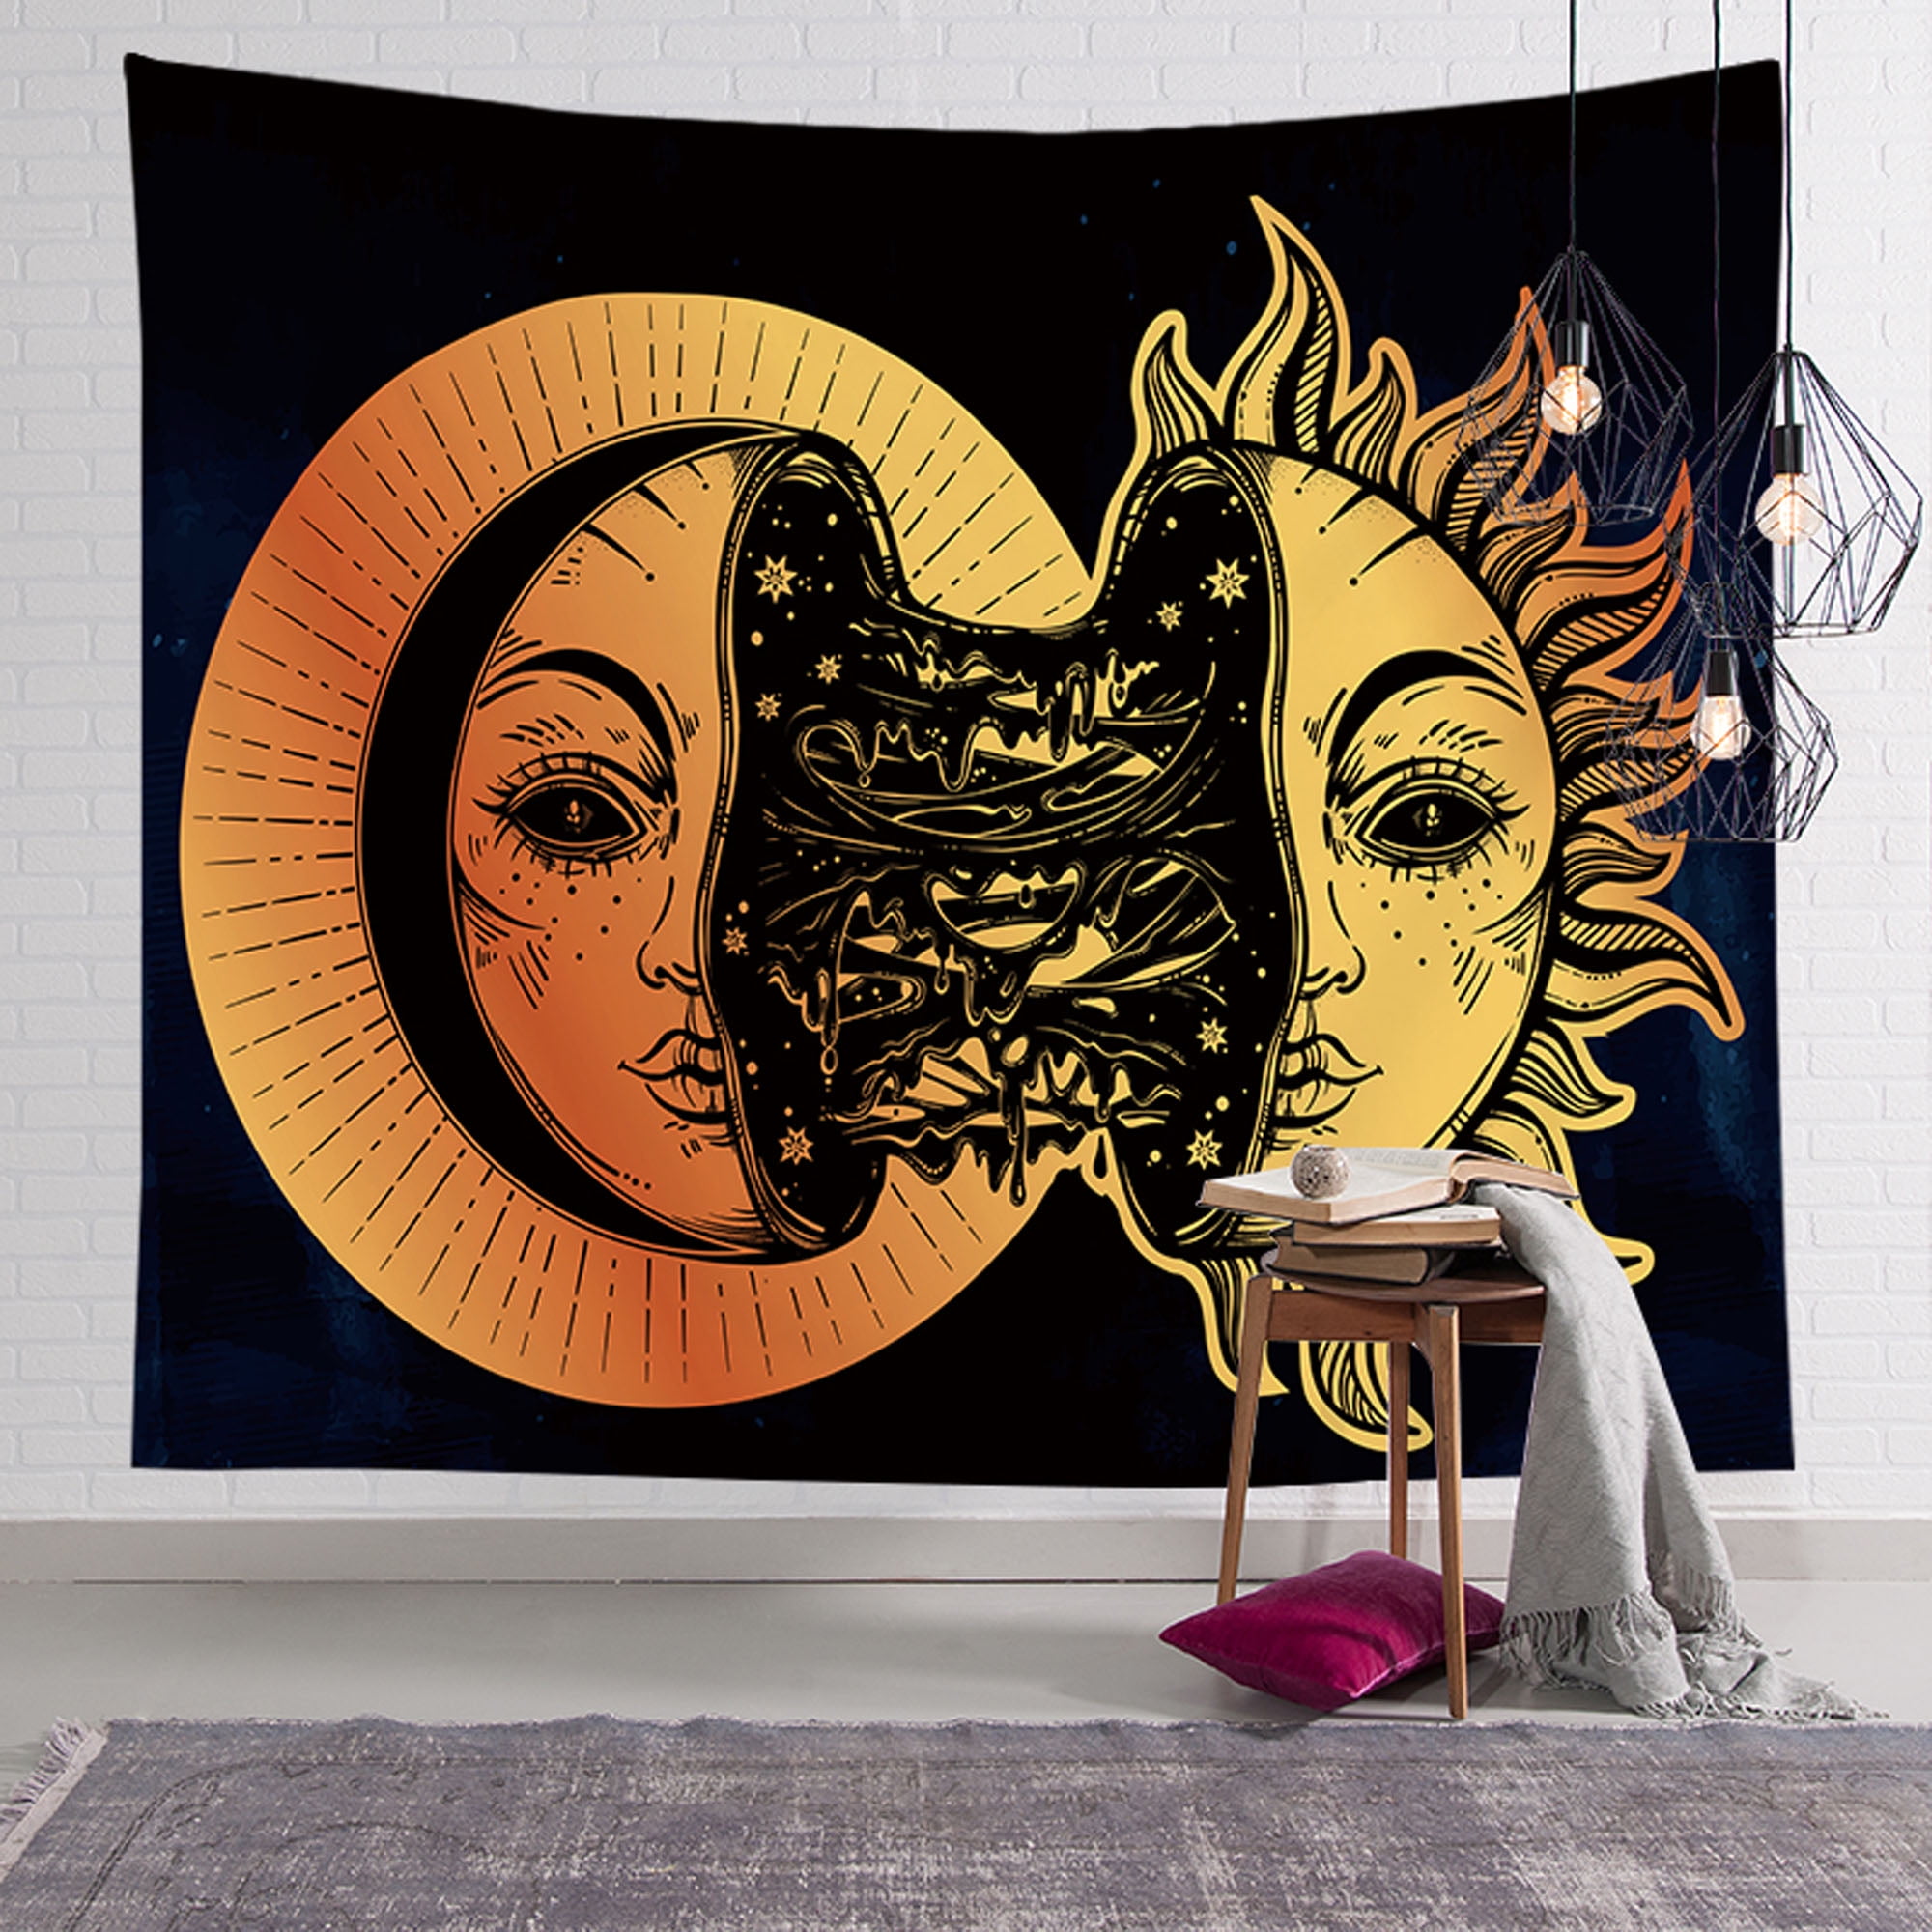 HIPPIE PSYCHEDELIC FACE PRINTING TAPESTRY BOHEMIAN SUN MOON WALL HANGING BLANKET 